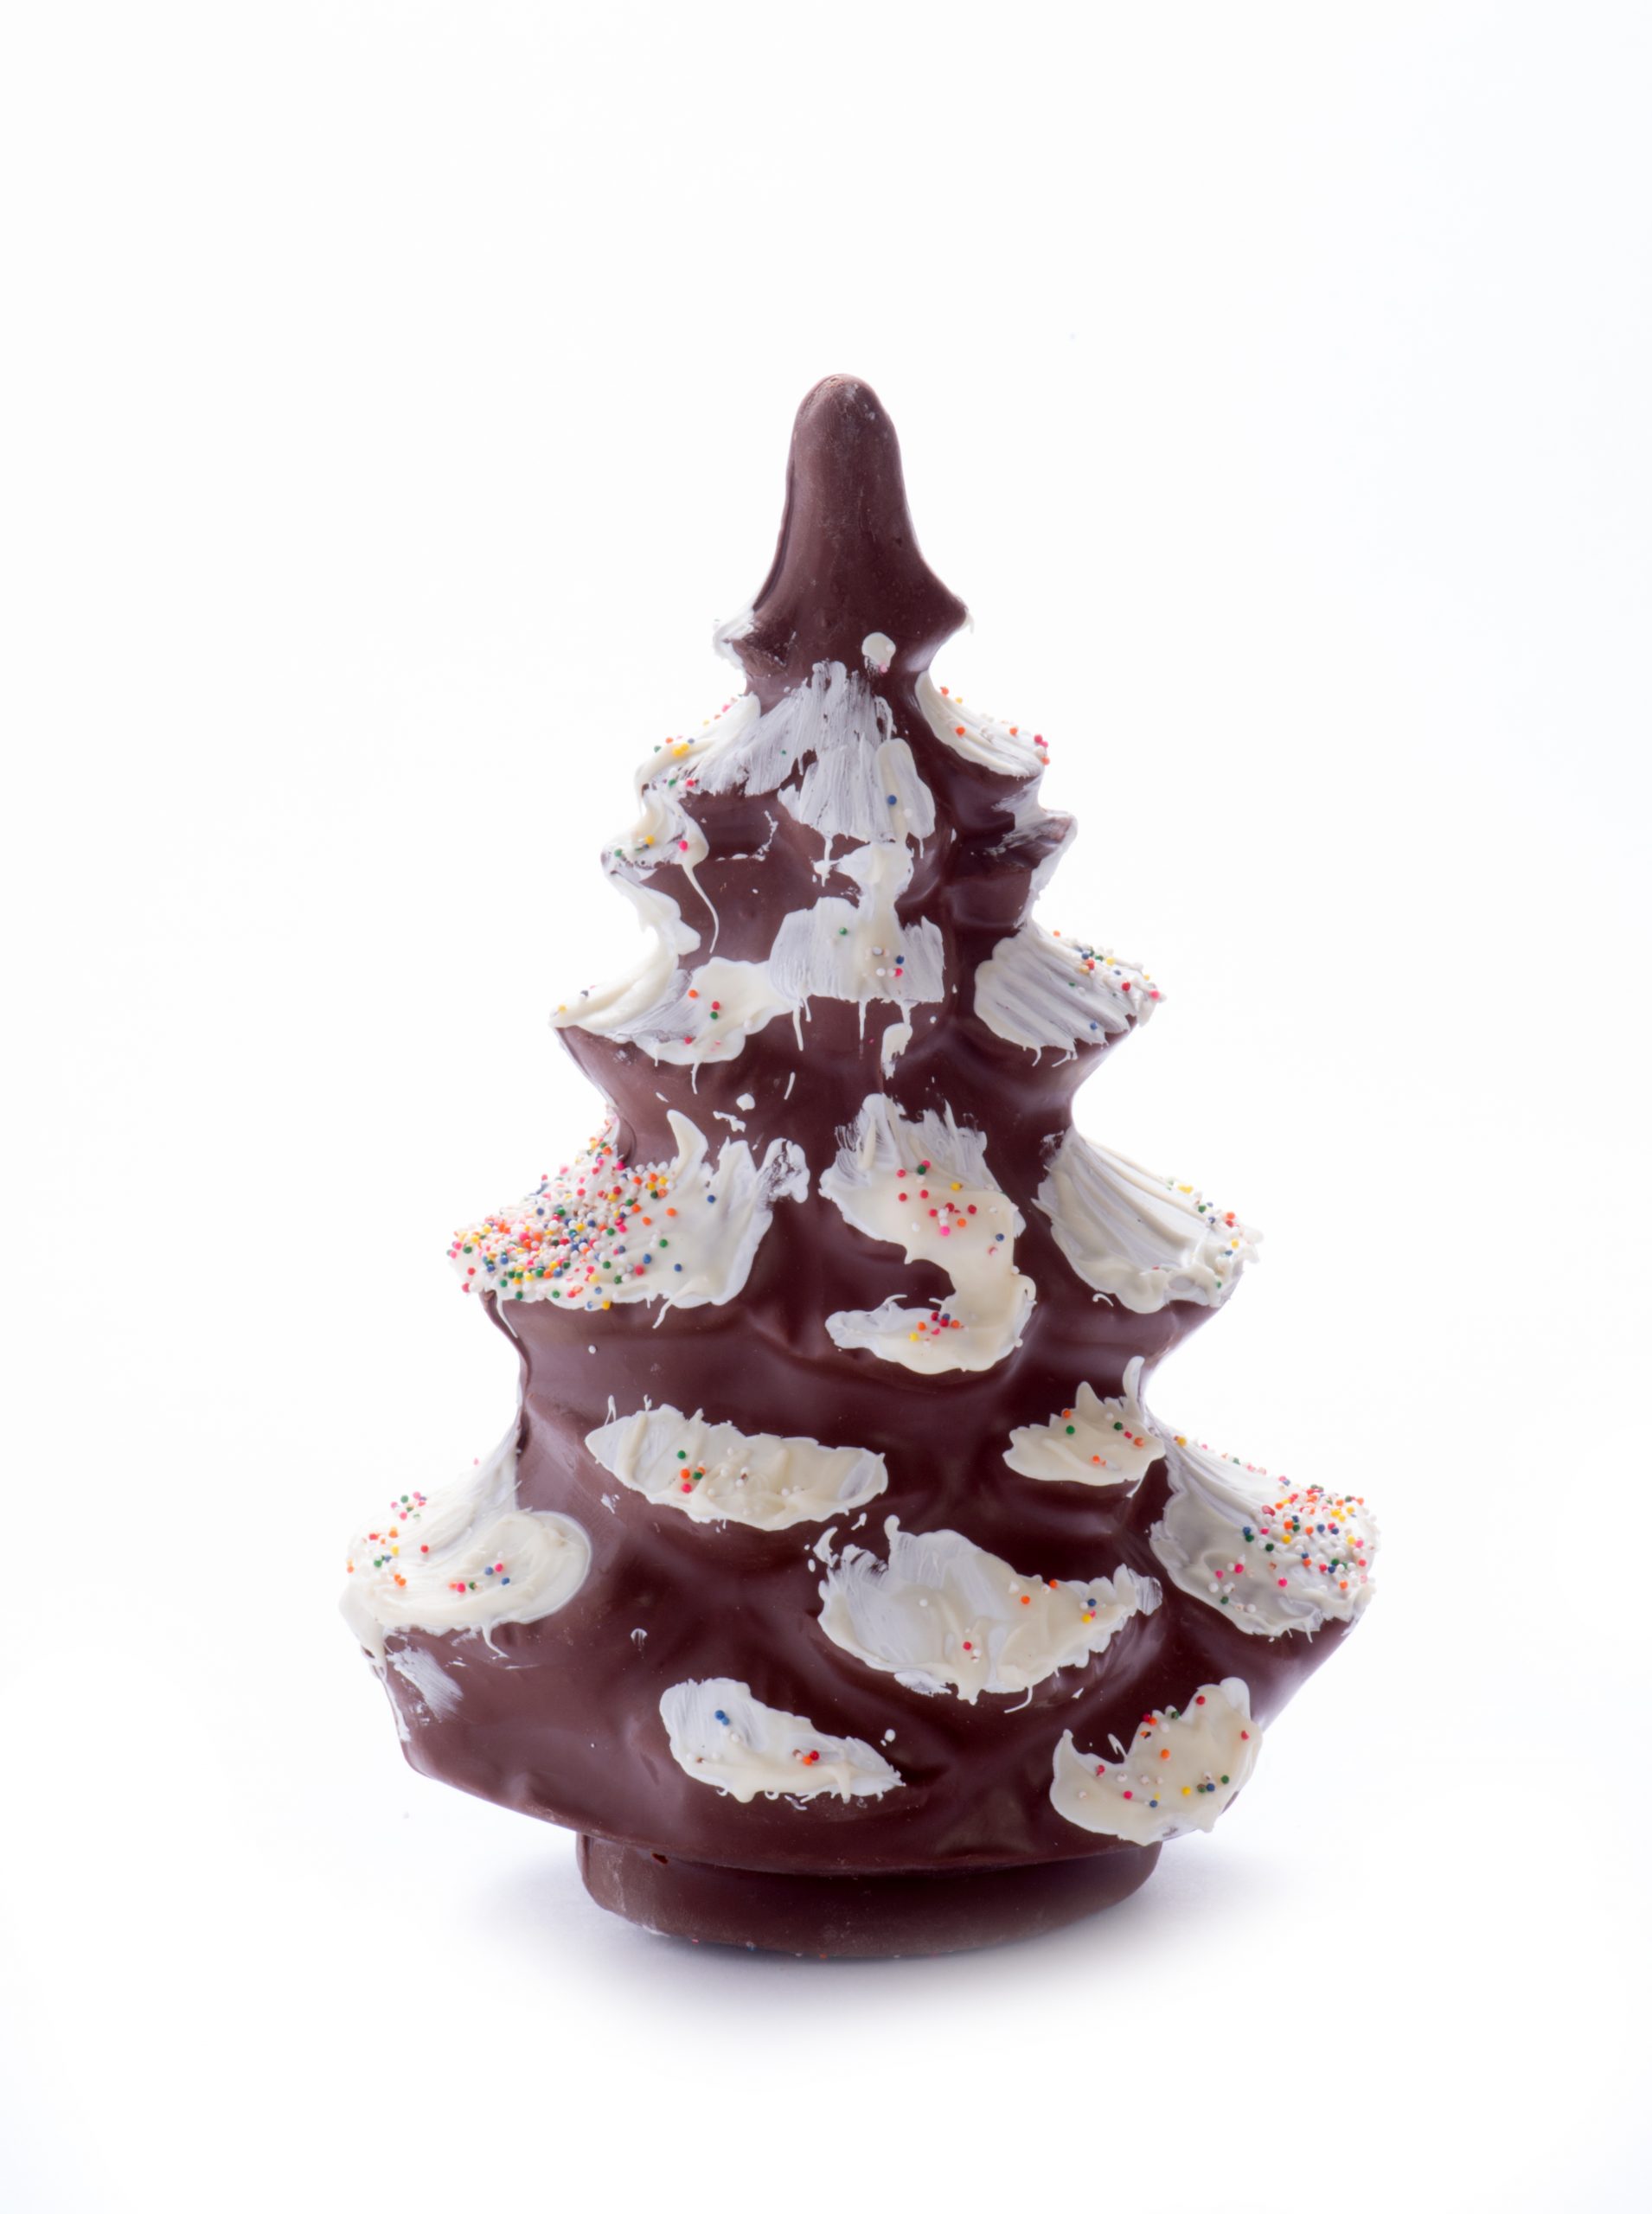 Tear & Share Crescent Christmas Tree - Chocolate Chocolate and More!